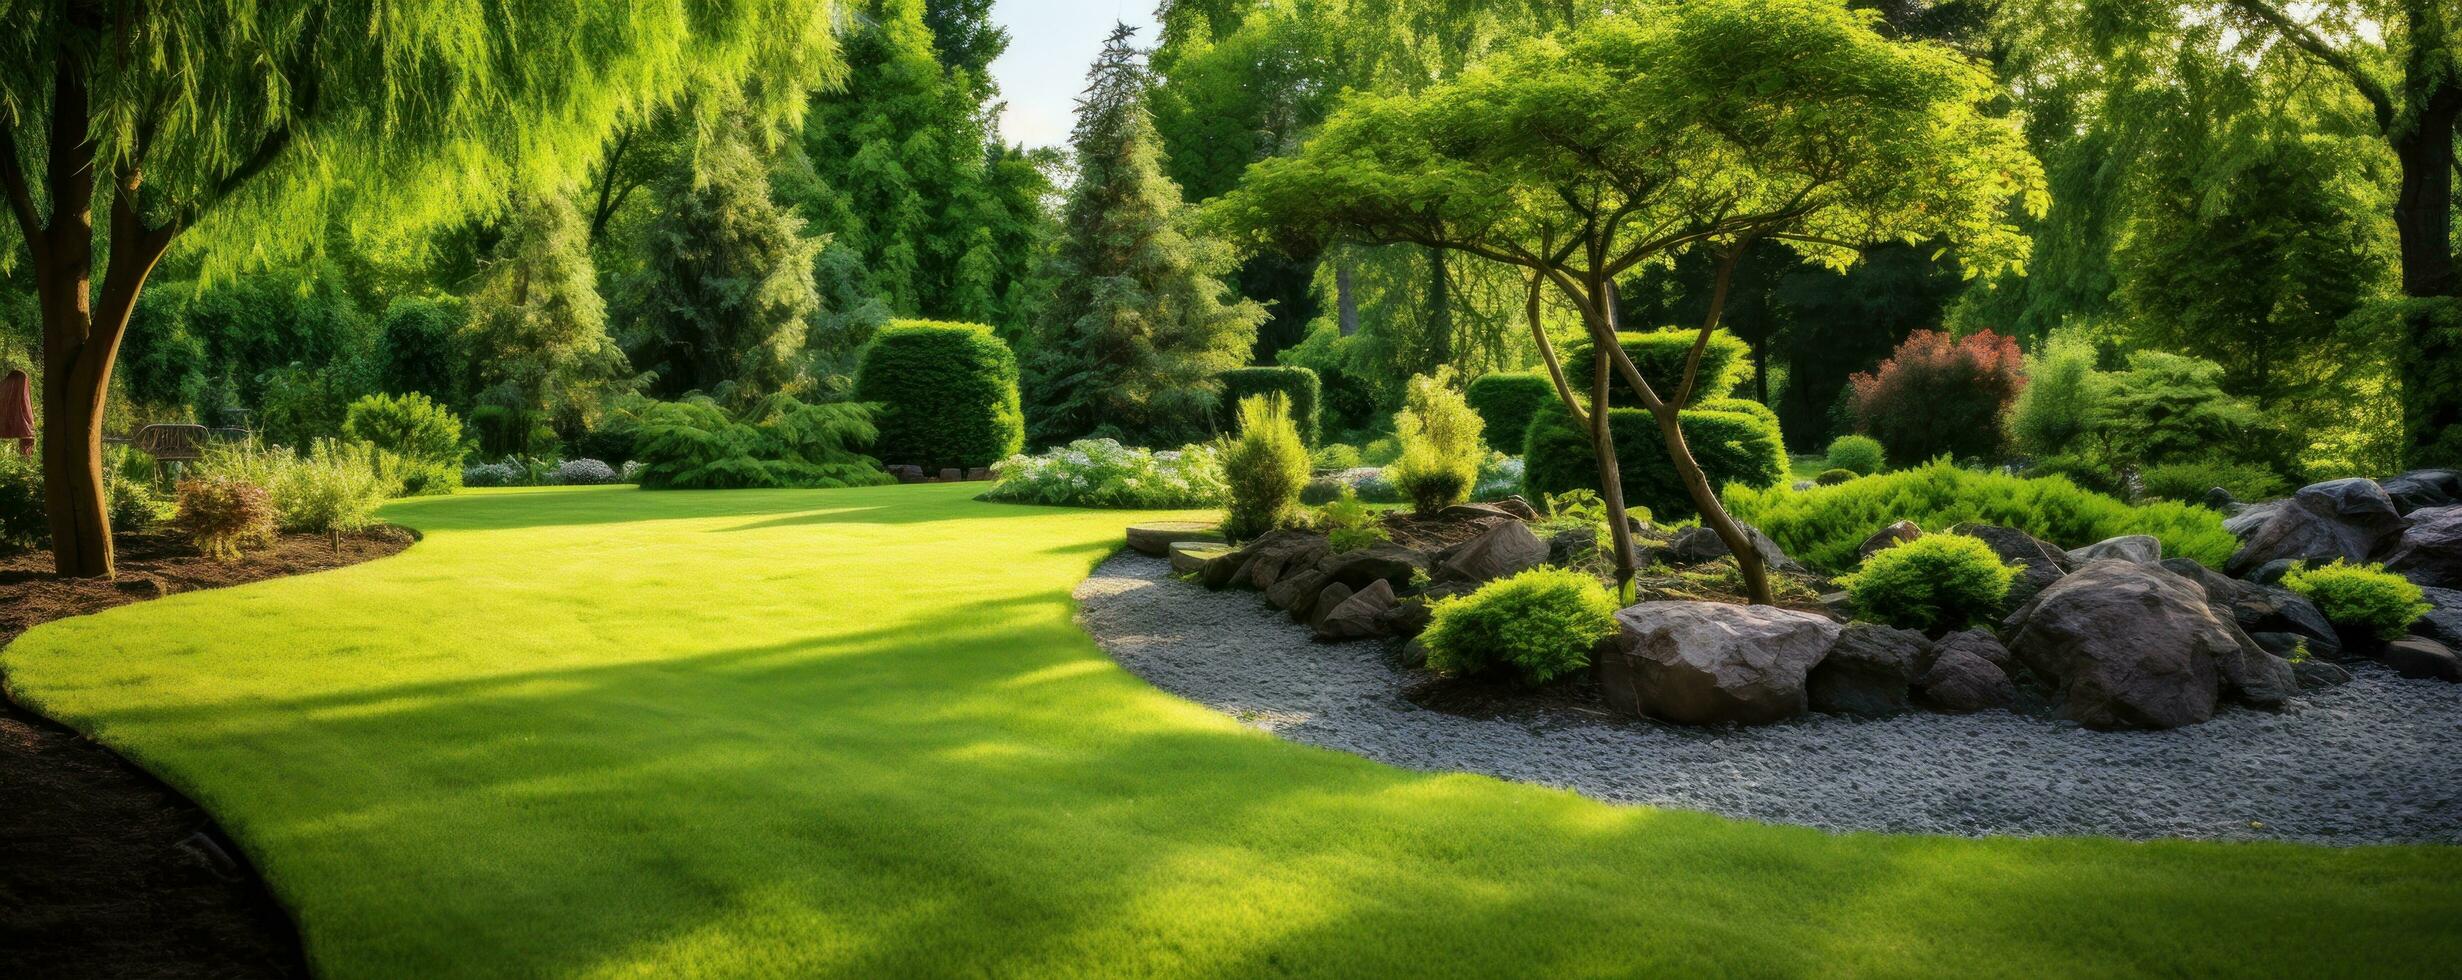 An elegant garden to relax in the summer photo